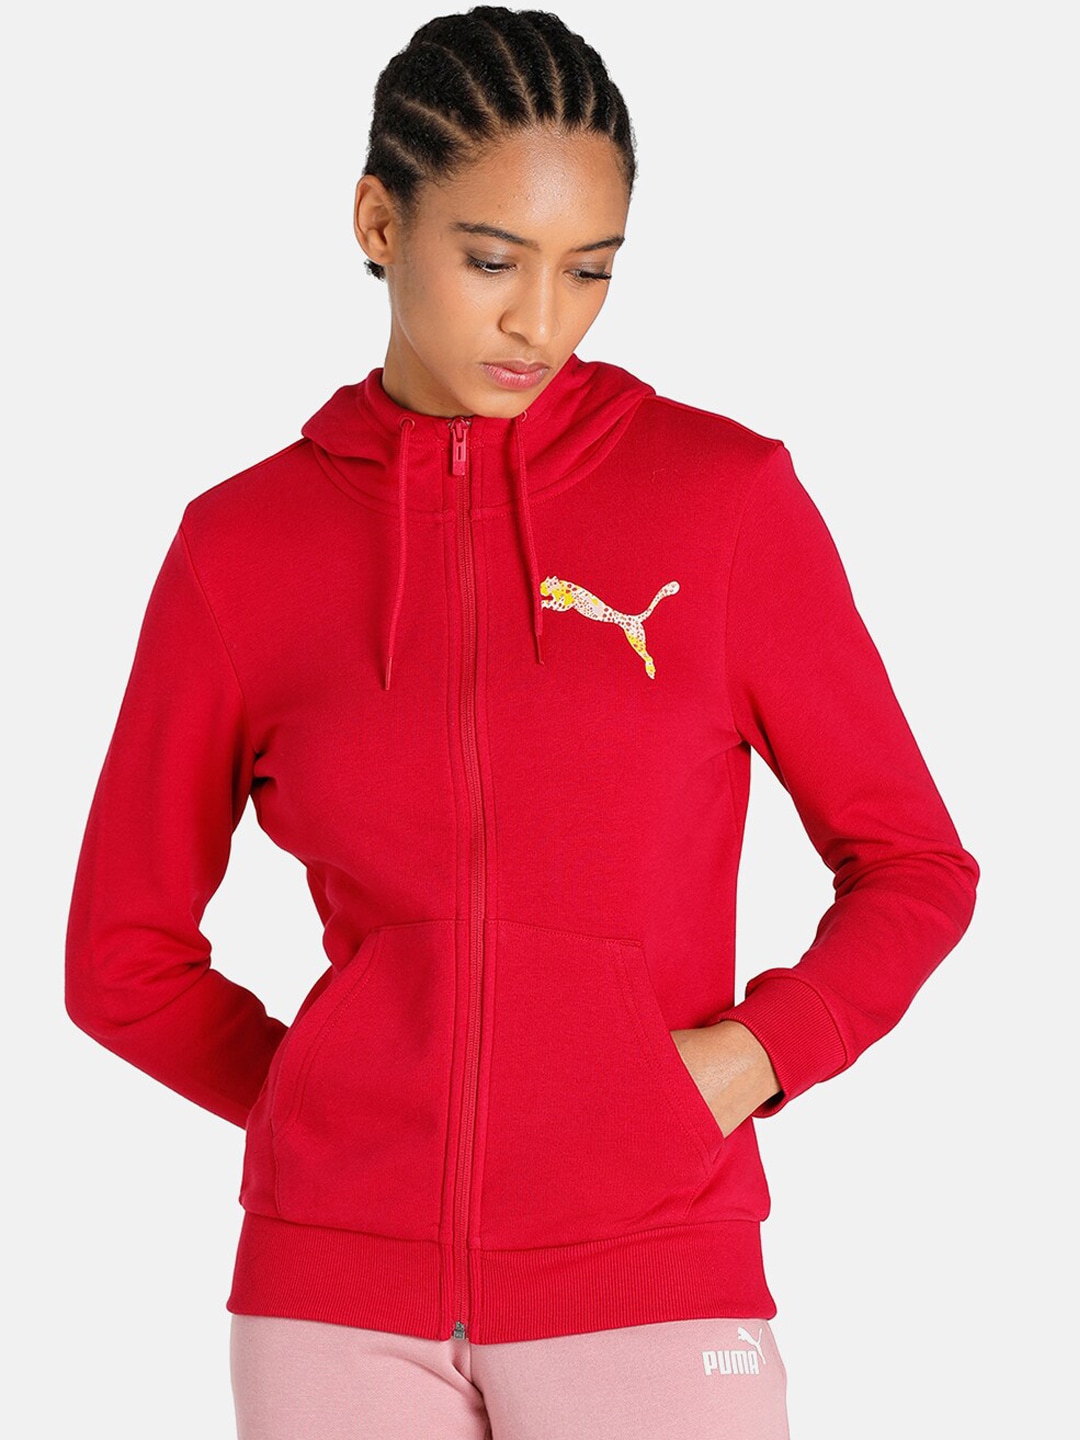 Puma Women Red Brand Logo Printed Hooded Jackets Price in India